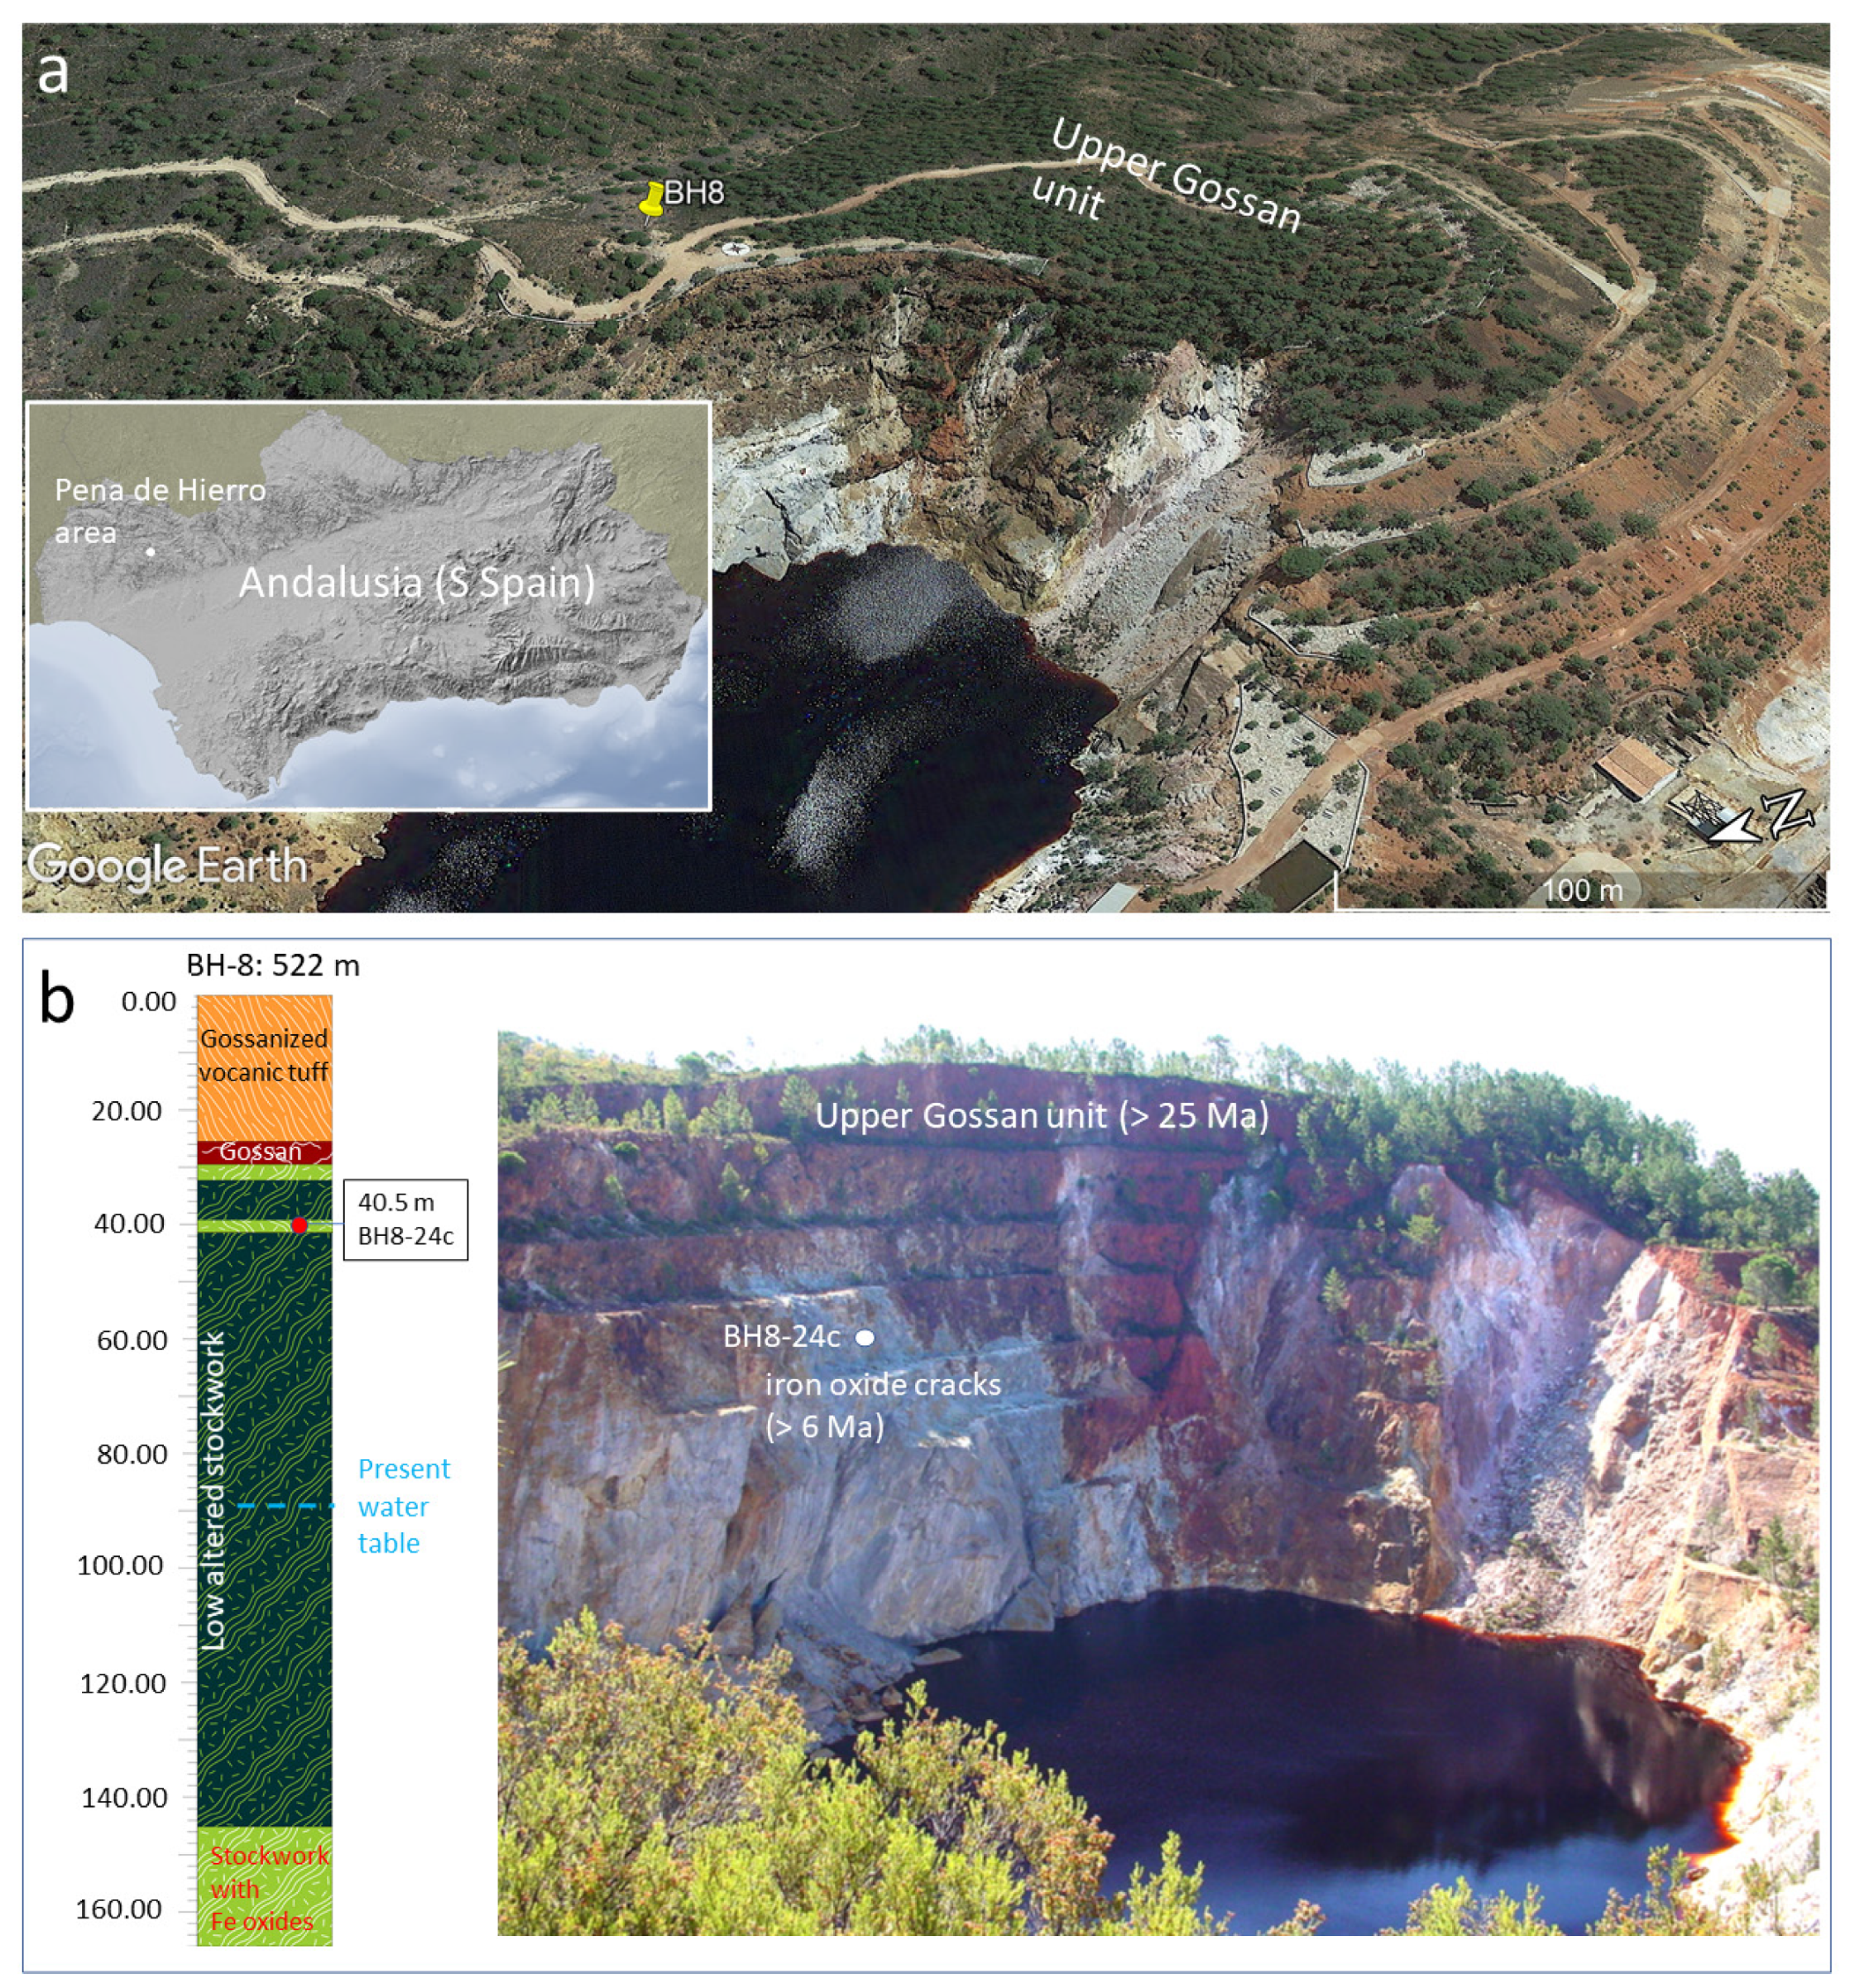 Microorganisms | Free Full-Text | Preservation of Underground Microbial  Diversity in Ancient Subsurface Deposits (&gt;6 Ma) of the Rio Tinto  Basement | HTML